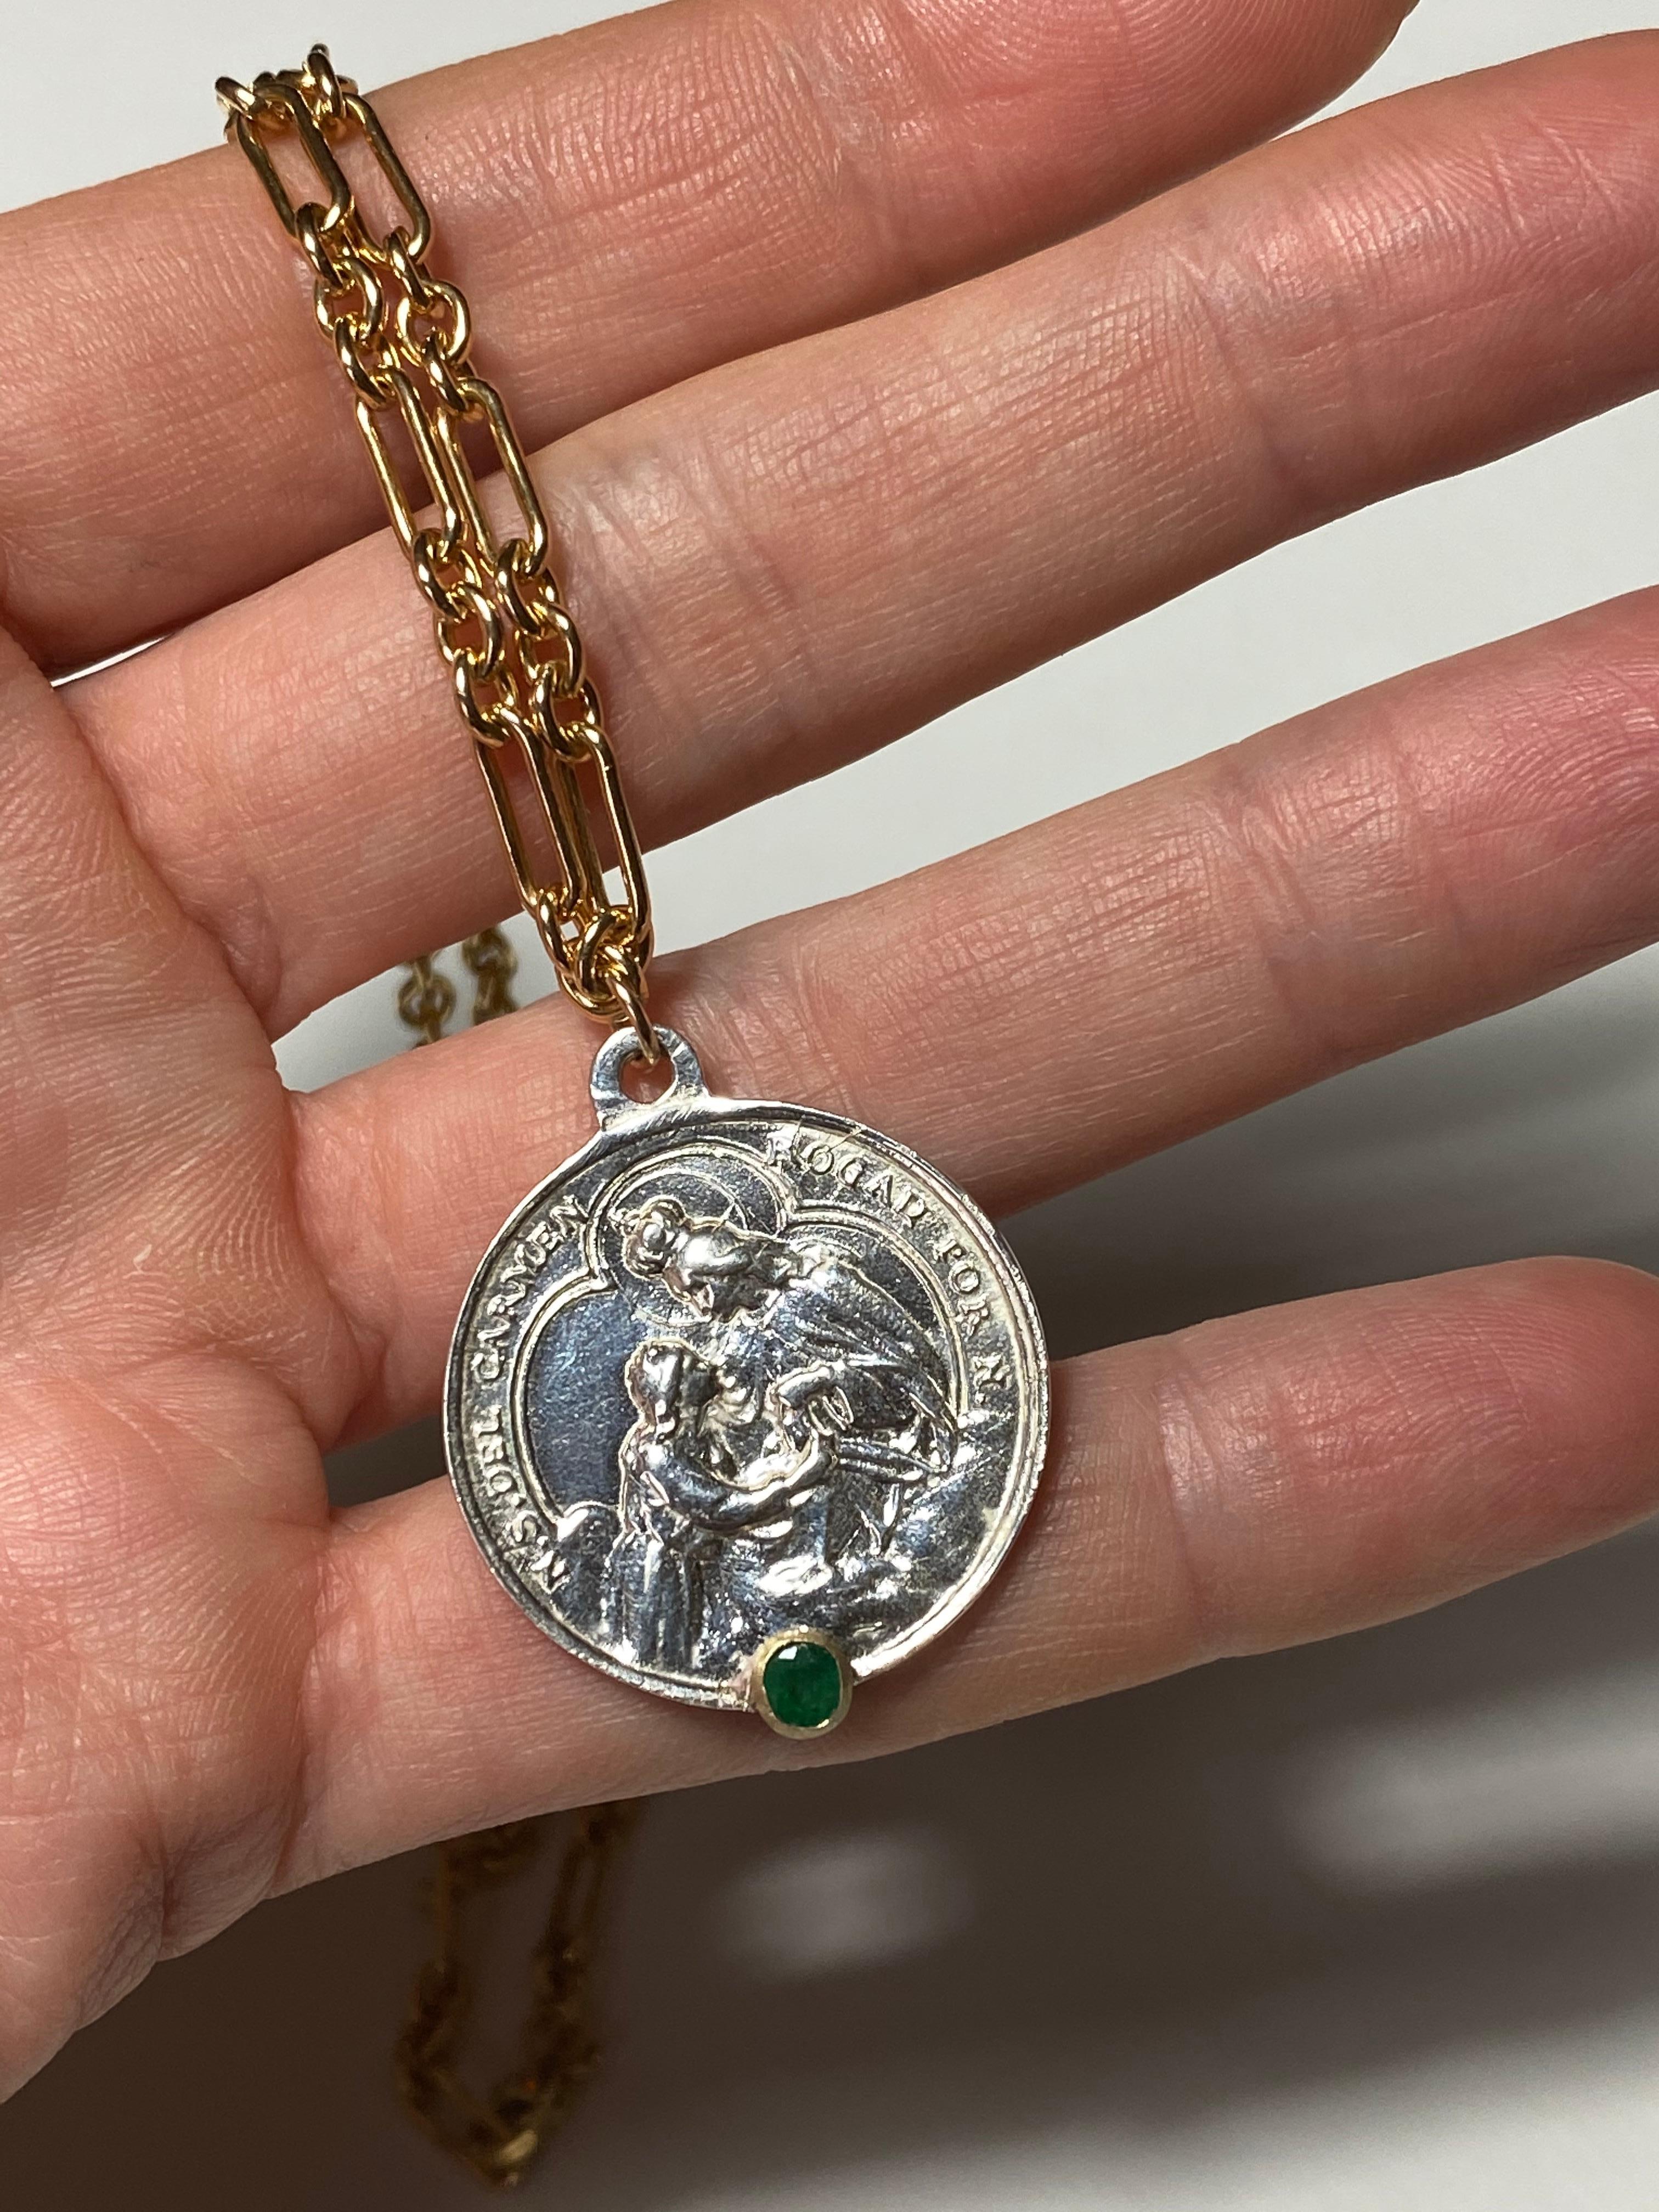 Emerald Virgin Mary Necklace Medal Chunky Chain Pendant J Dauphin

Exclusive piece with a Round Virgin Mary Medal in Silver with an Emerald set in a Gold Prong prong and with a gold filled Chain. Necklace is 16